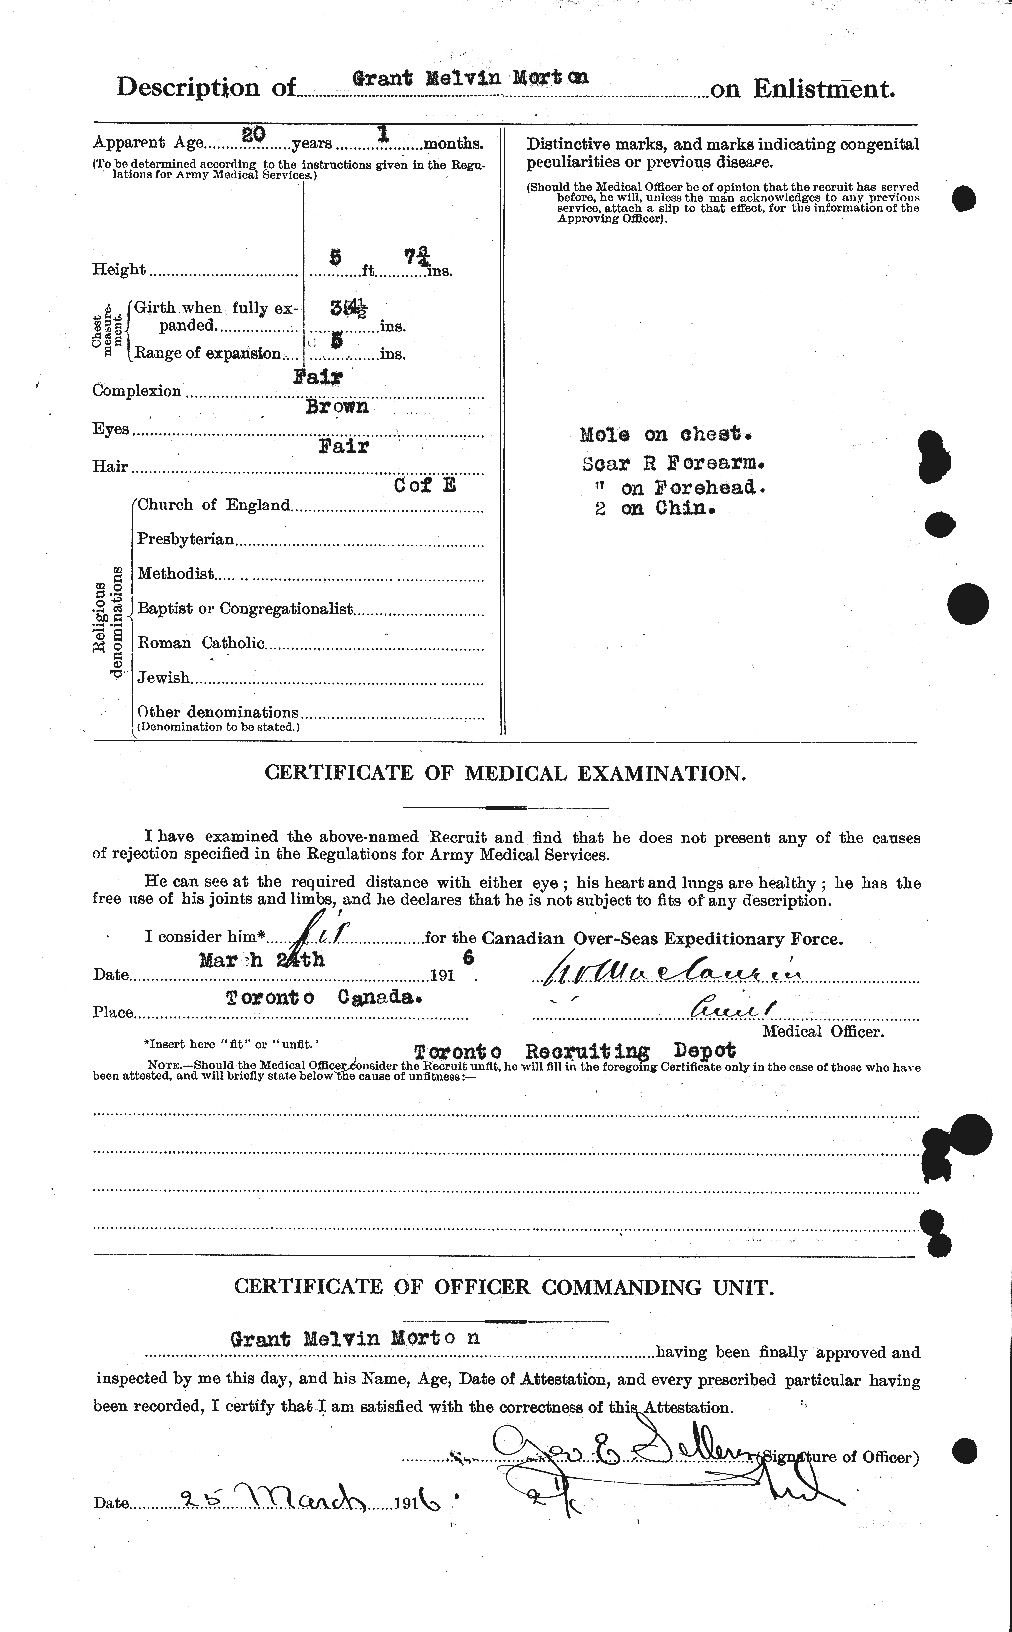 Personnel Records of the First World War - CEF 509850b